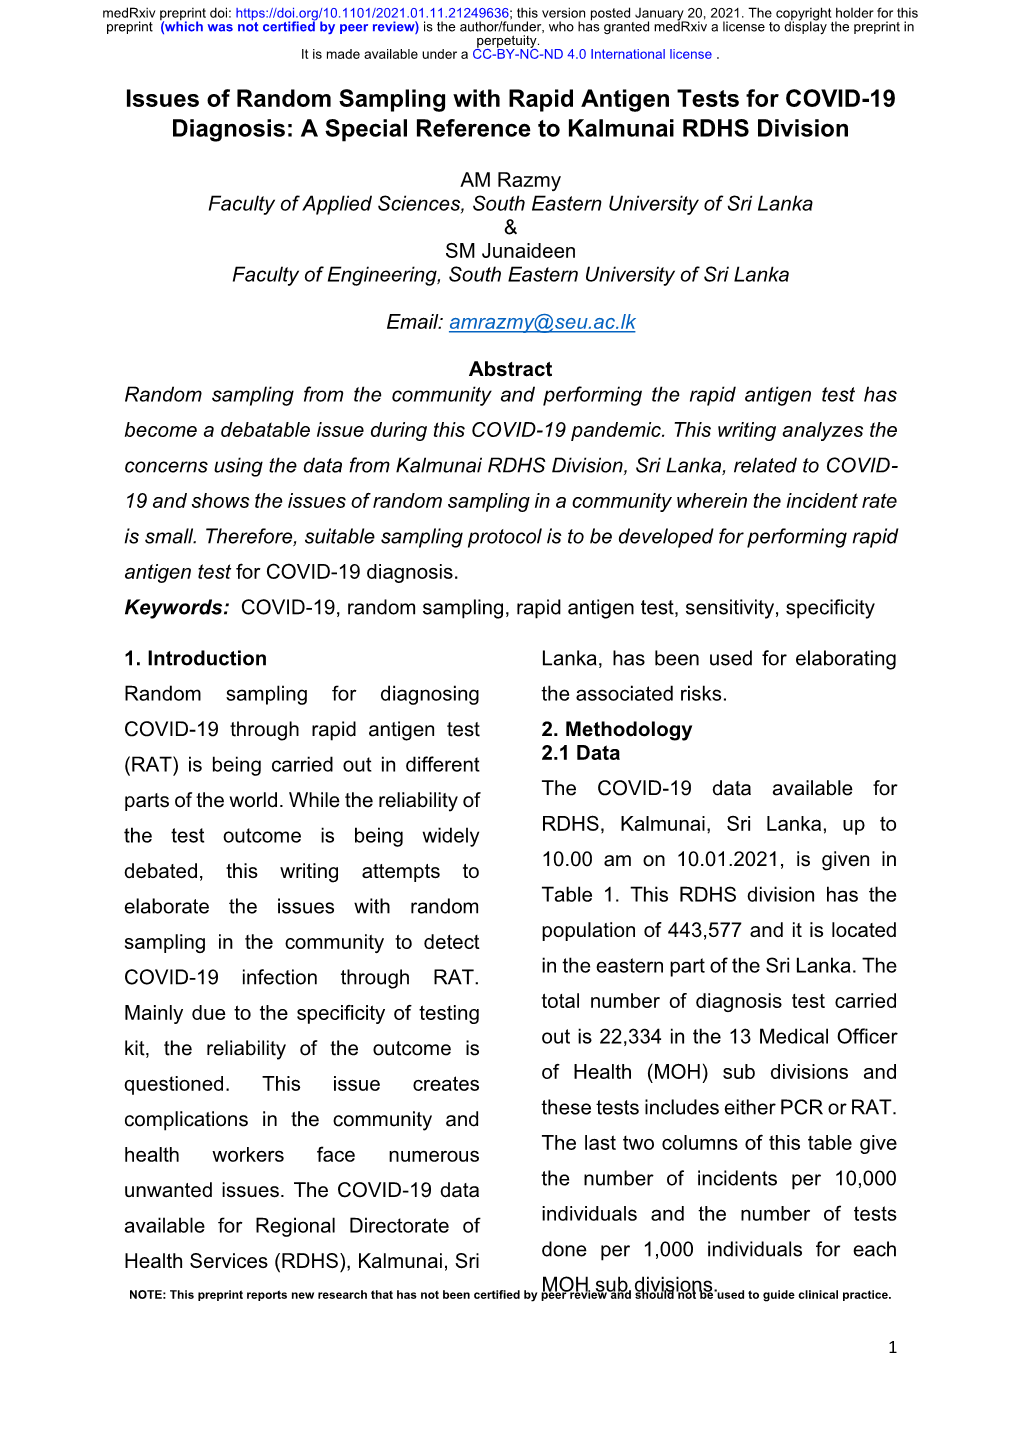 Issues of Random Sampling with Rapid Antigen Tests for COVID-19 Diagnosis: a Special Reference to Kalmunai RDHS Division